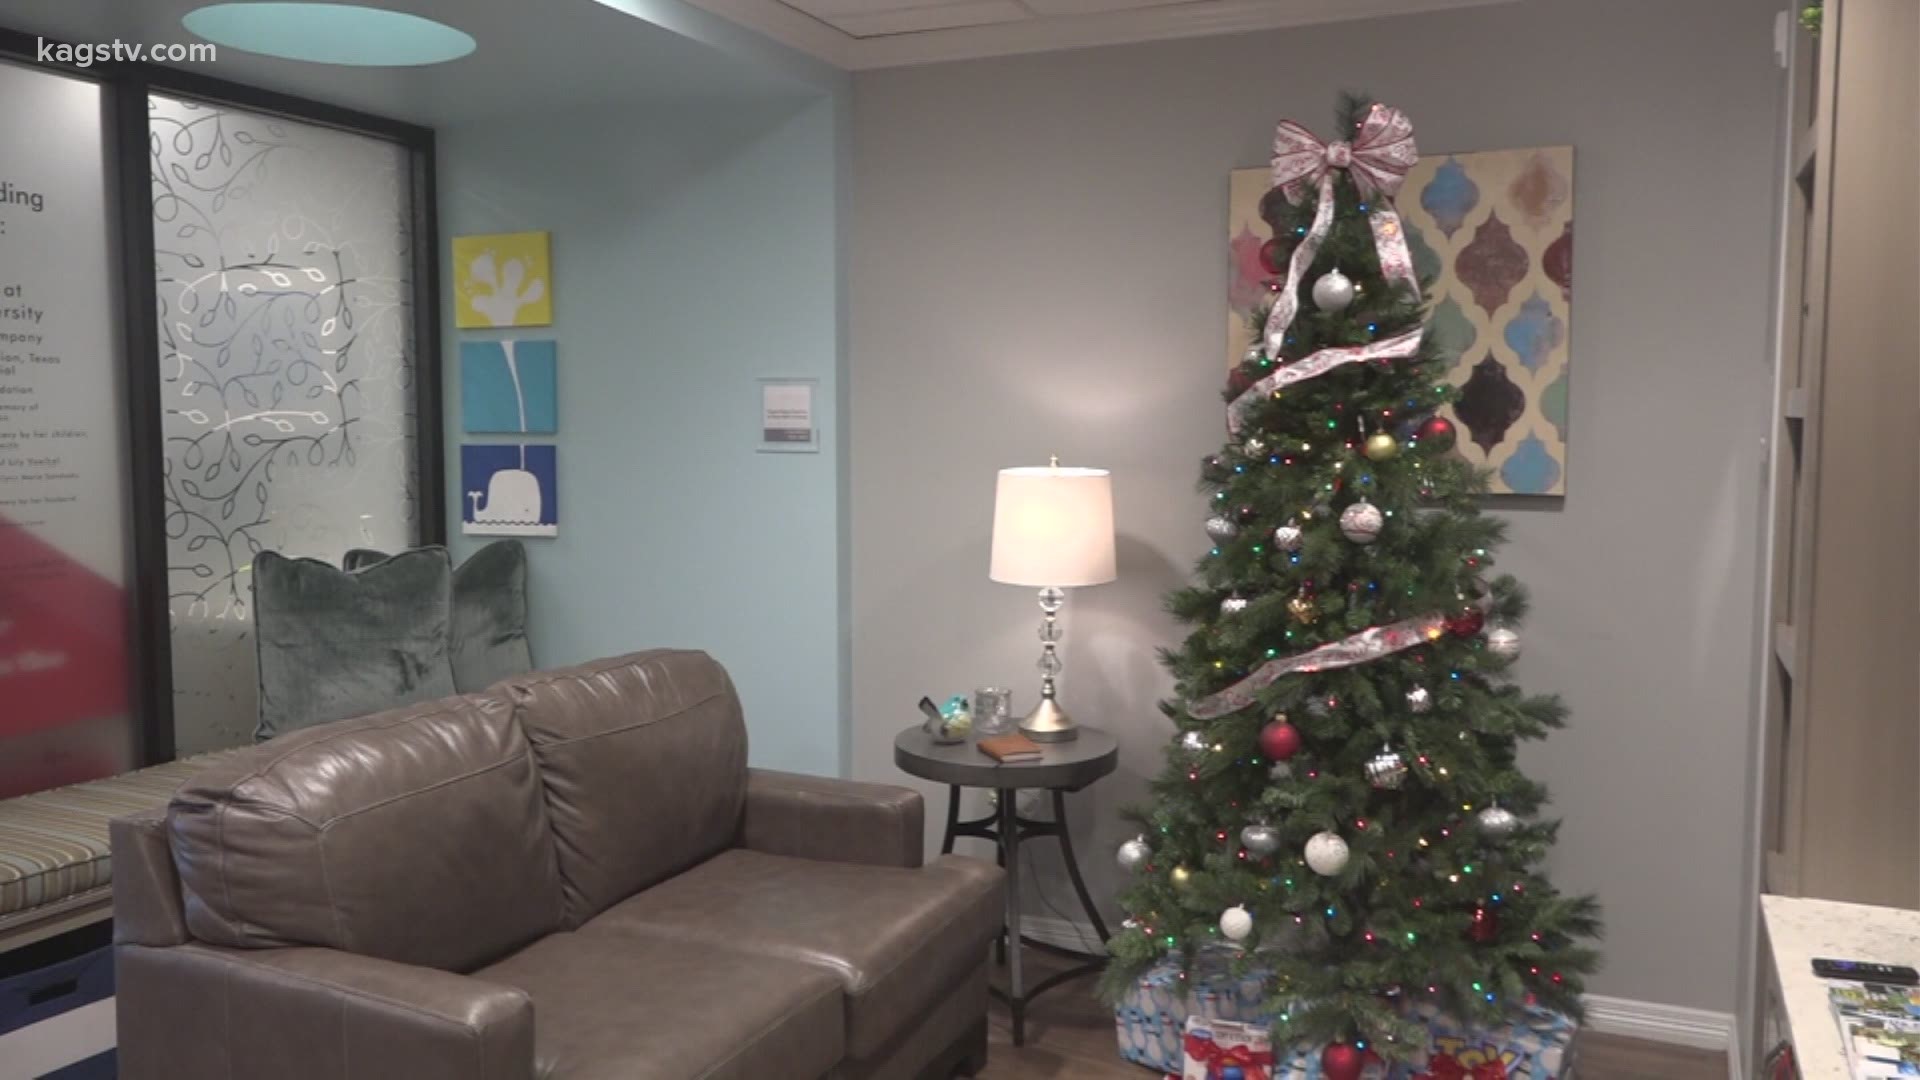 "Be the Light" campaign aims to help families with sick children have bright holidays while they stay in local Ronald McDonald family rooms.